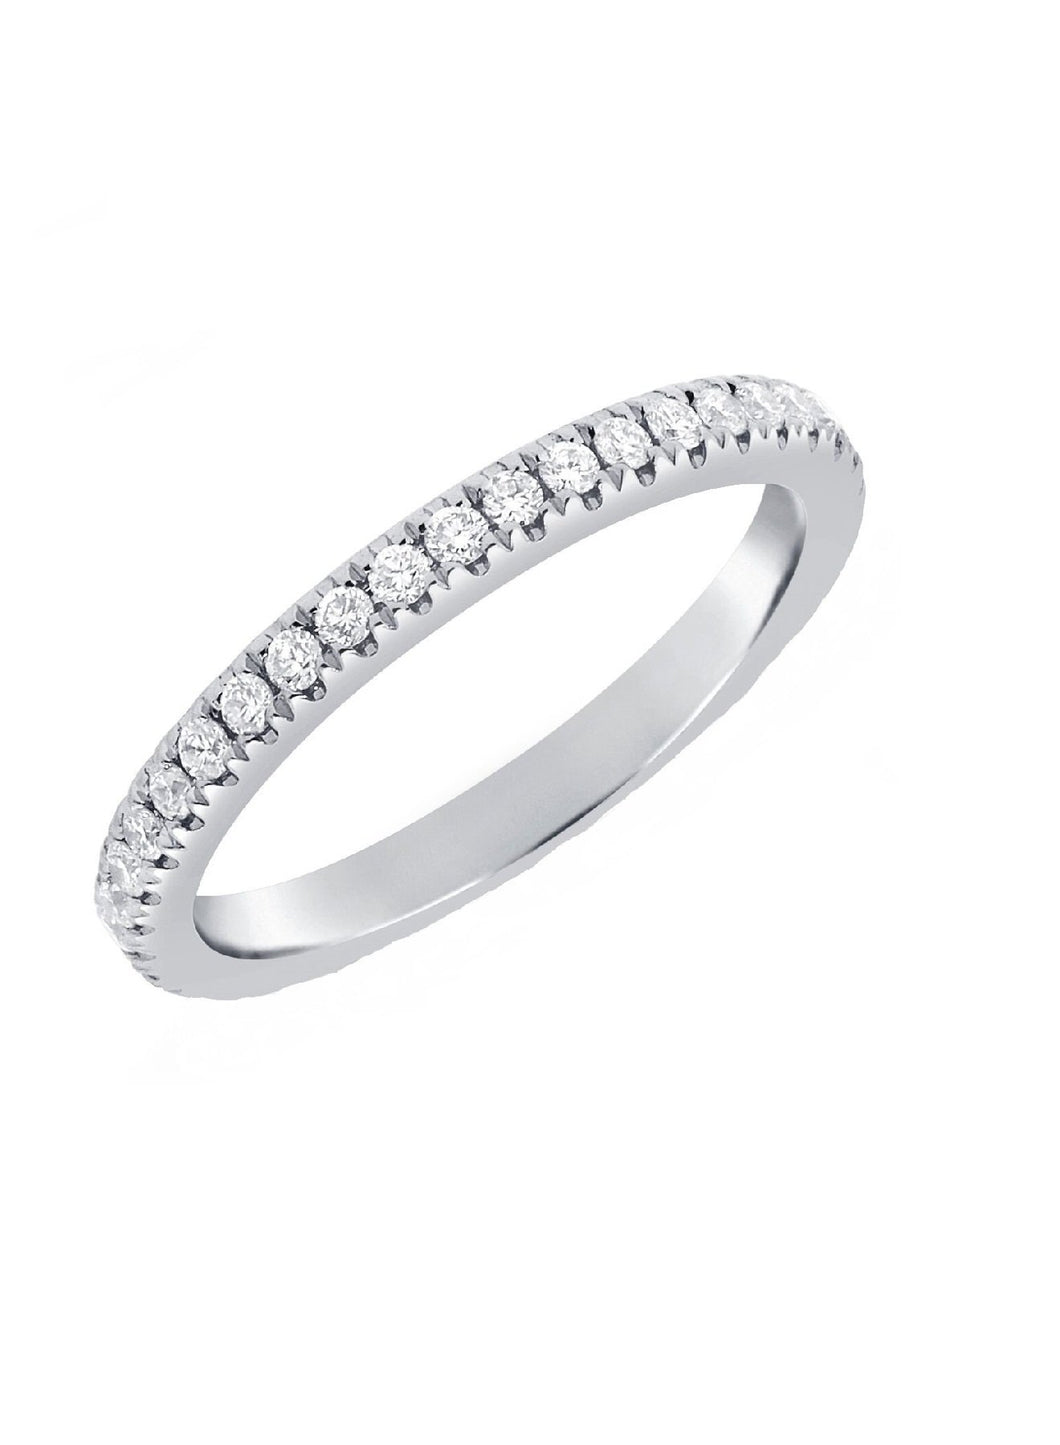 14k Gold 0.40 Carat Diamond Band, Available in White and Rose Gold